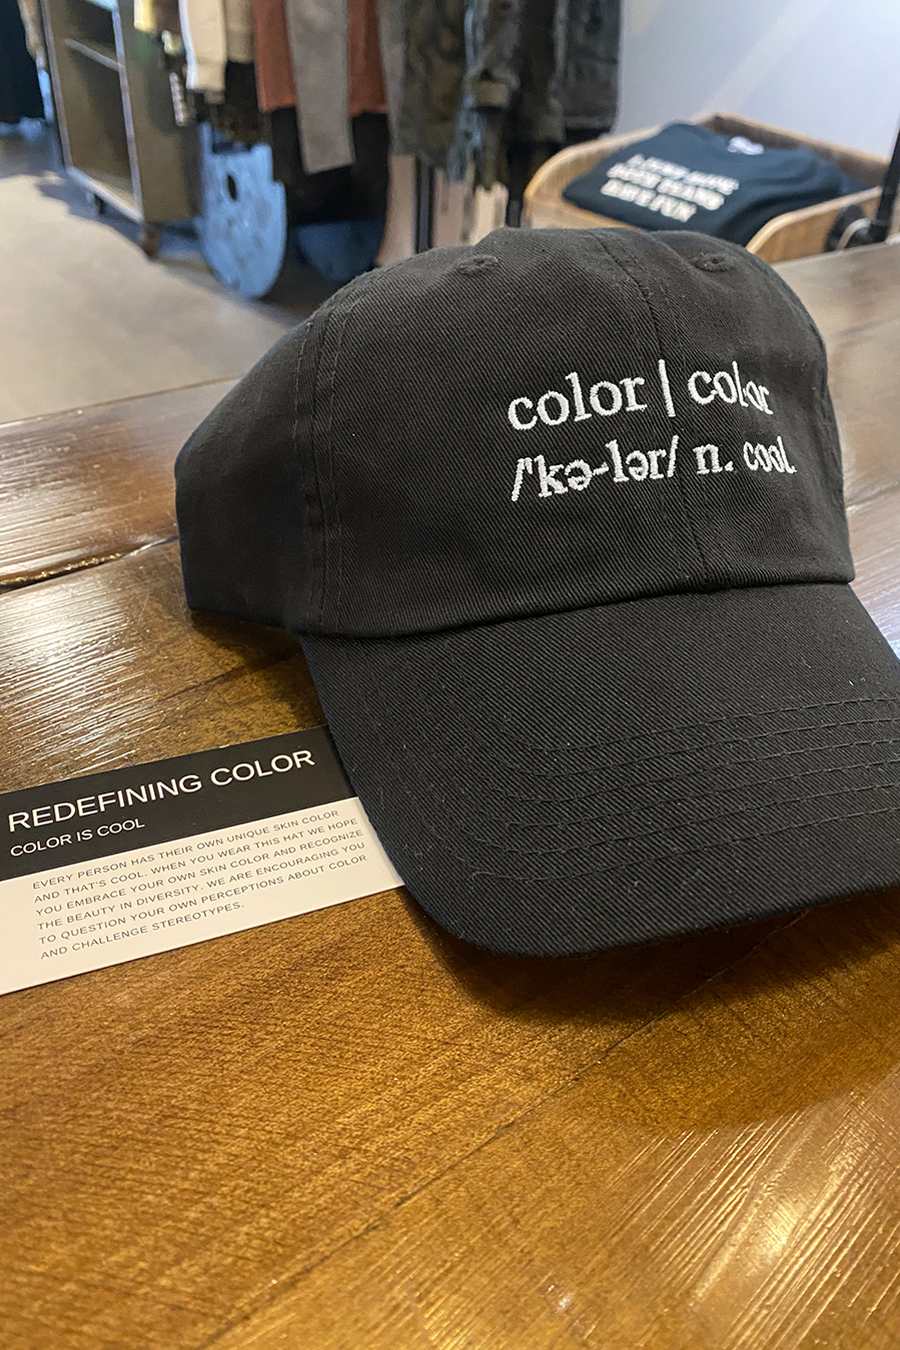 Color is Cool Hat - Main Image Number 2 of 3